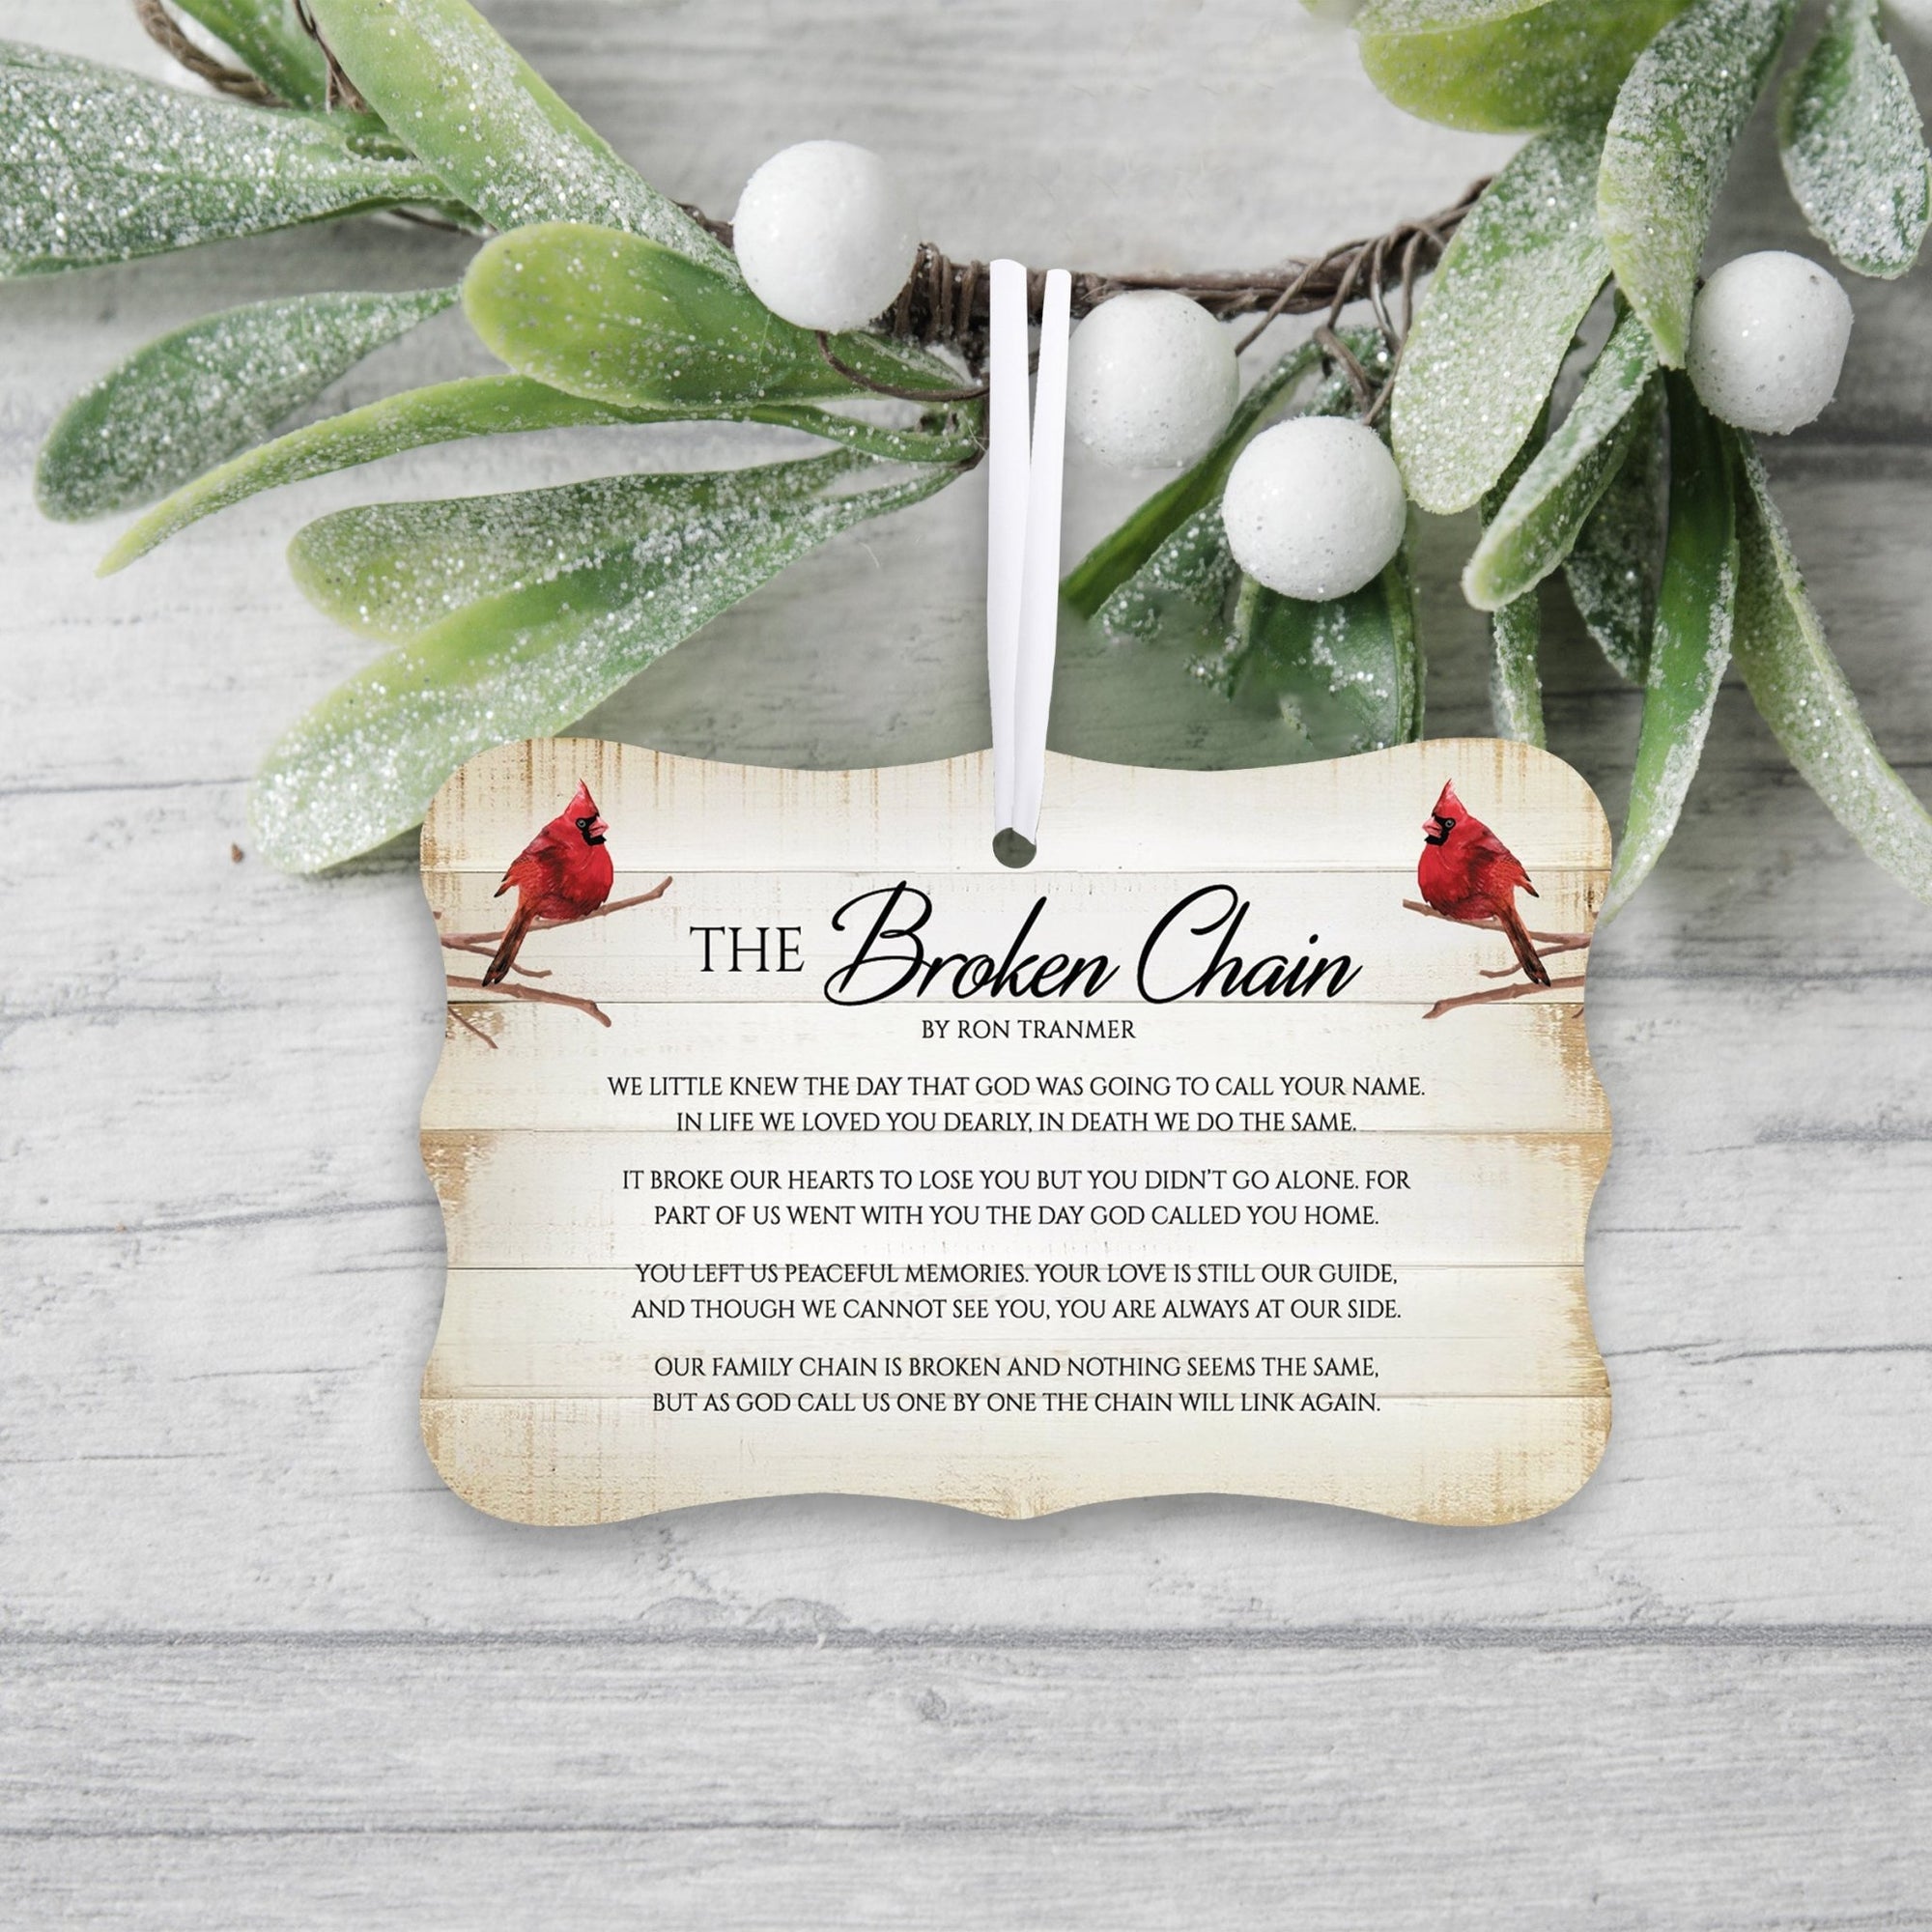 Rustic Scalloped Cardinal Wooden Ornament With Everyday Verses Gift Ideas - The Broken Chain - LifeSong Milestones